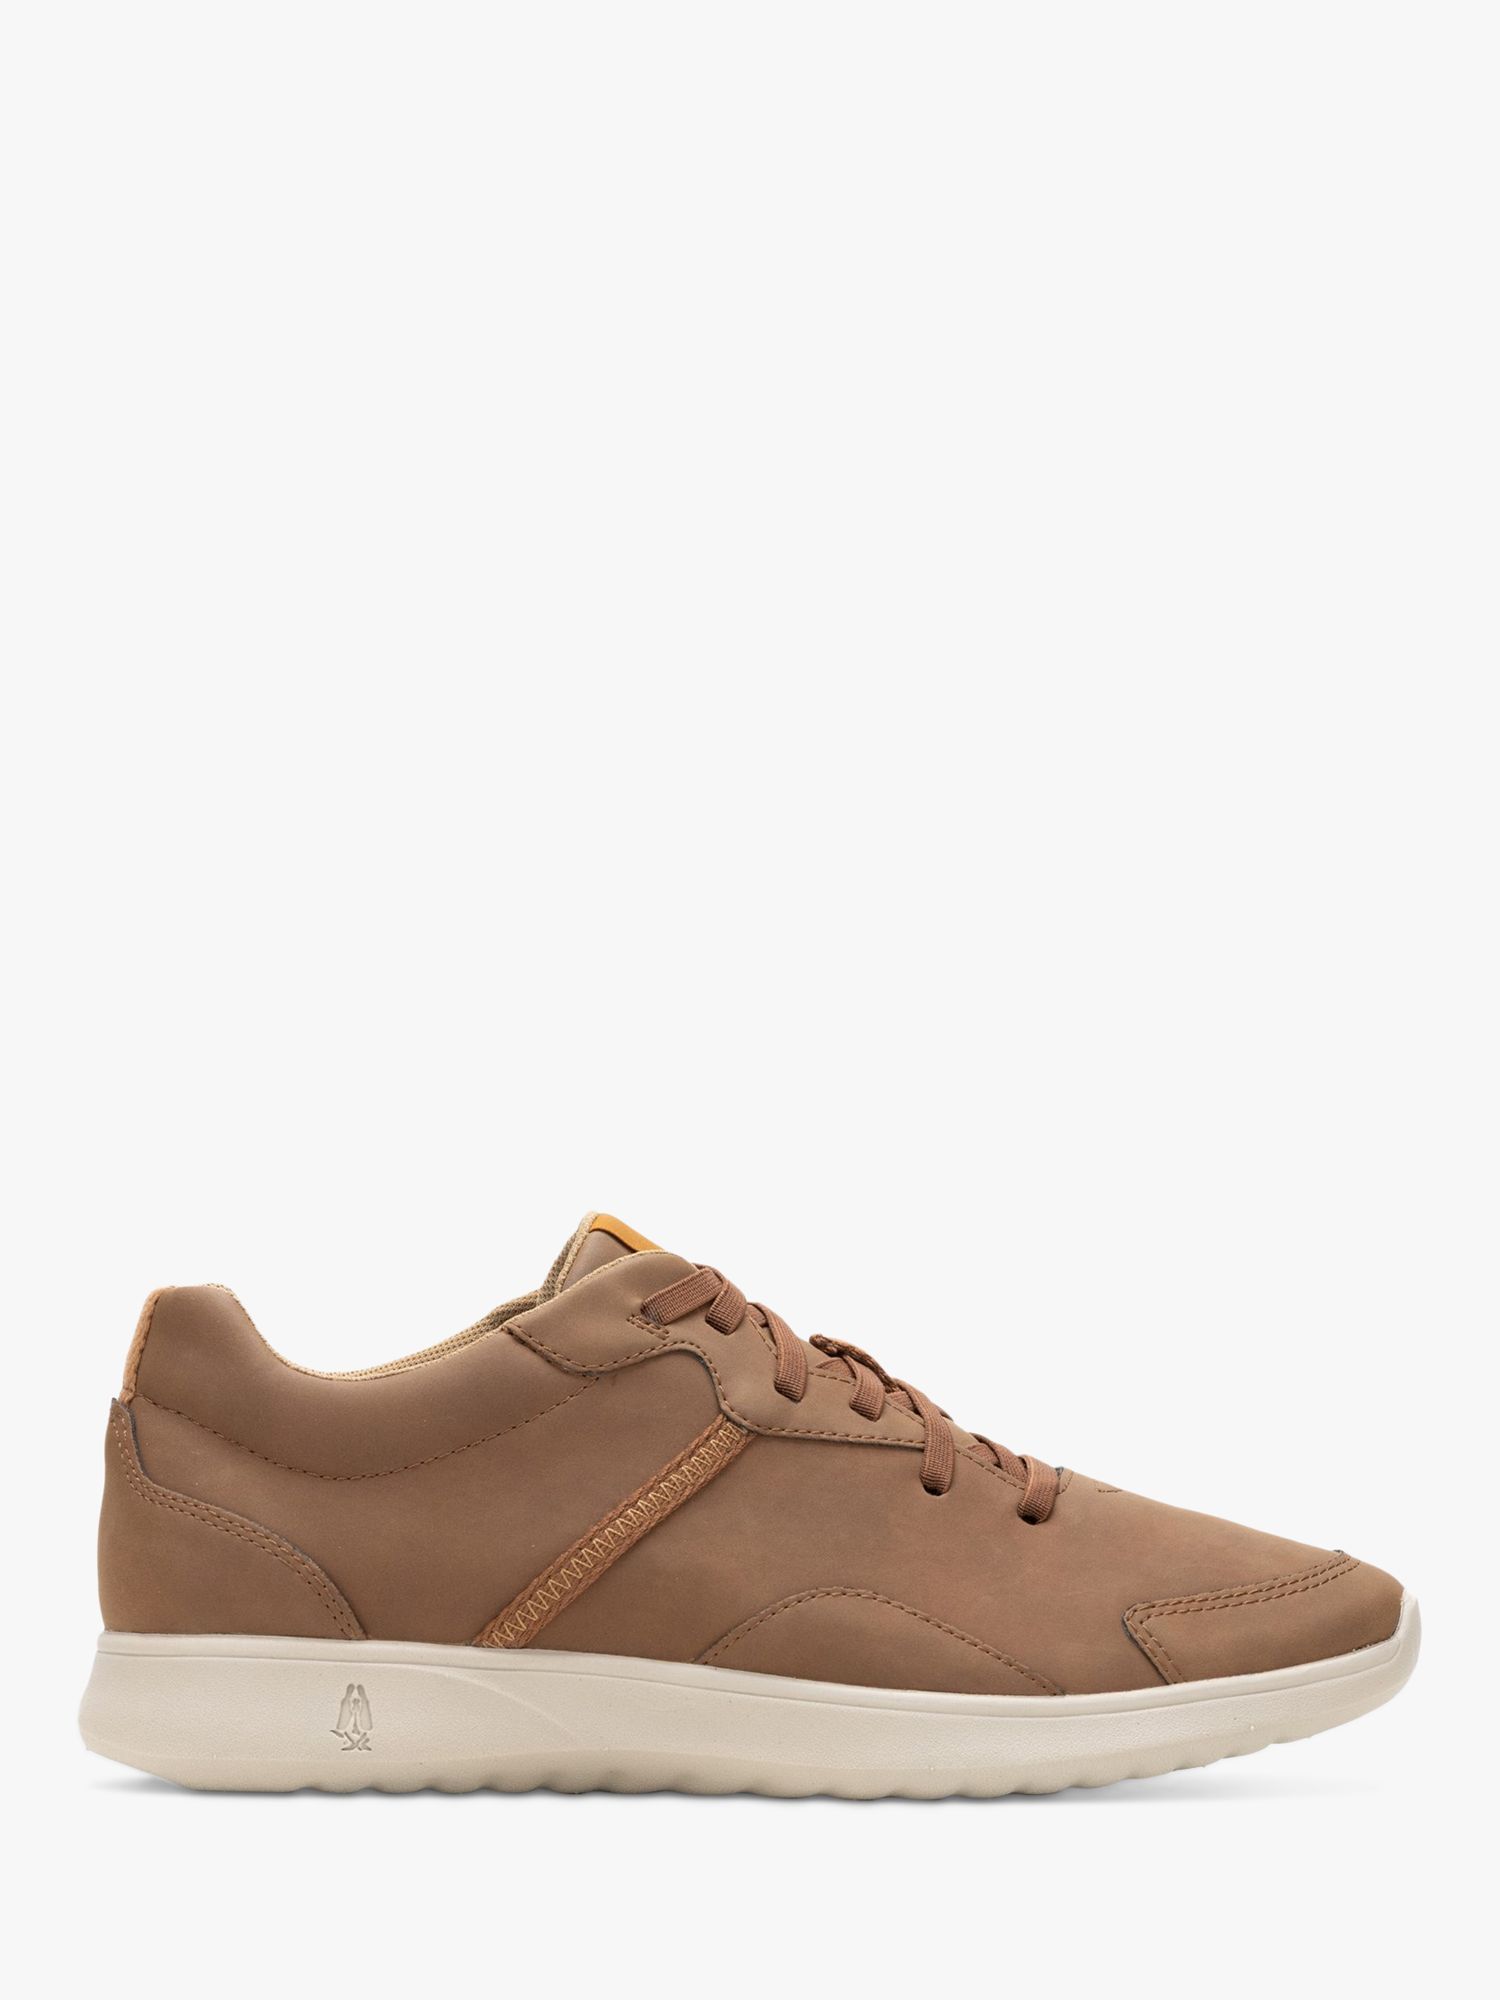 Hush Puppies The Good Trainers, Brown at John Lewis & Partners